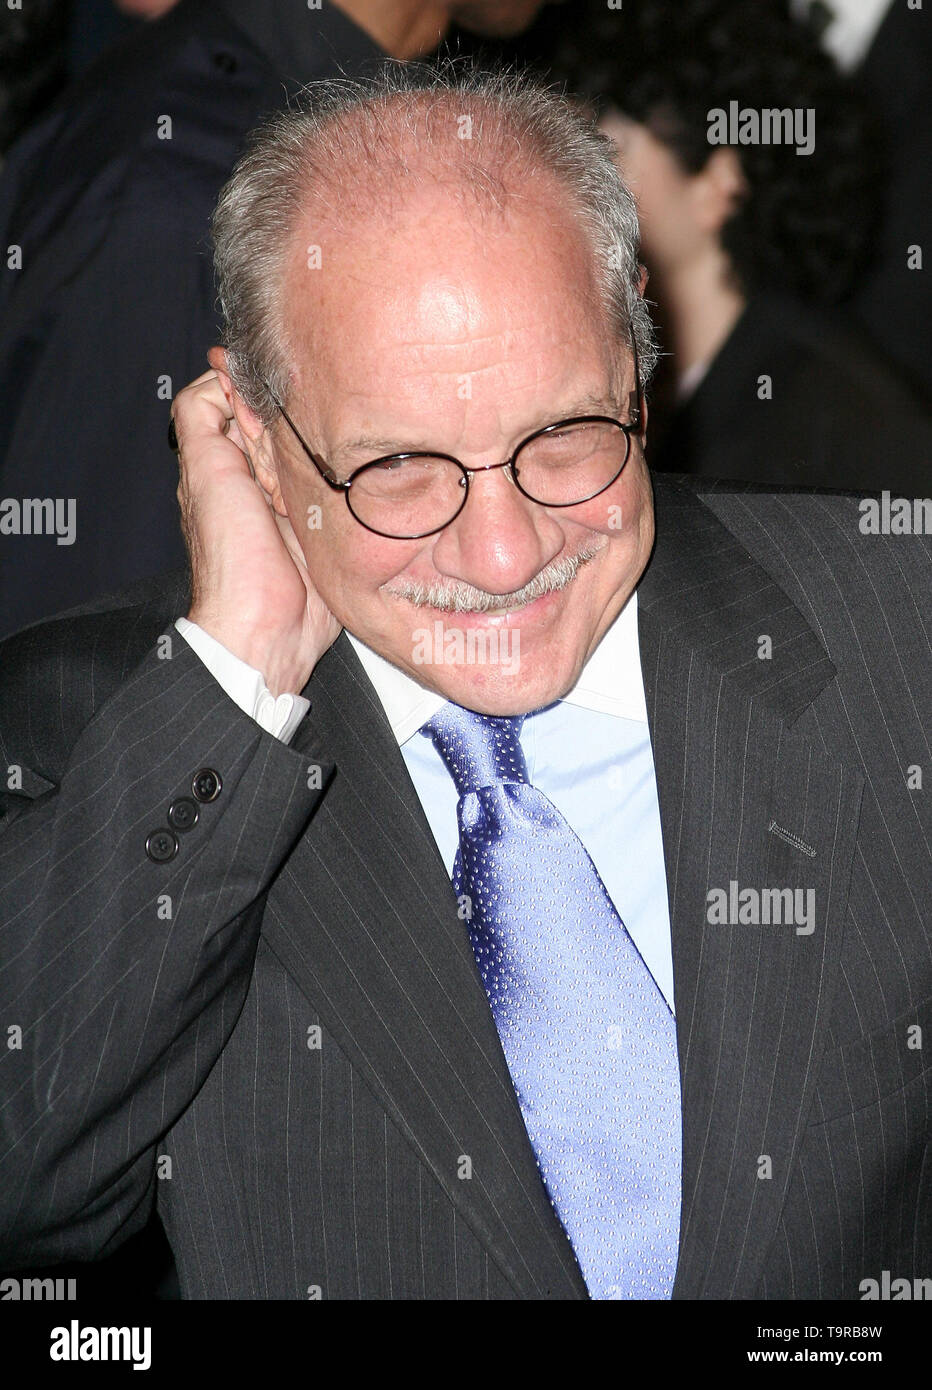 New York, USA. 28 September, 2007. Paul Schrader at the Premiere of 'The Darjeeling Limited' at Avery Fisher Hall. Credit: Steve Mack/Alamy Stock Photo